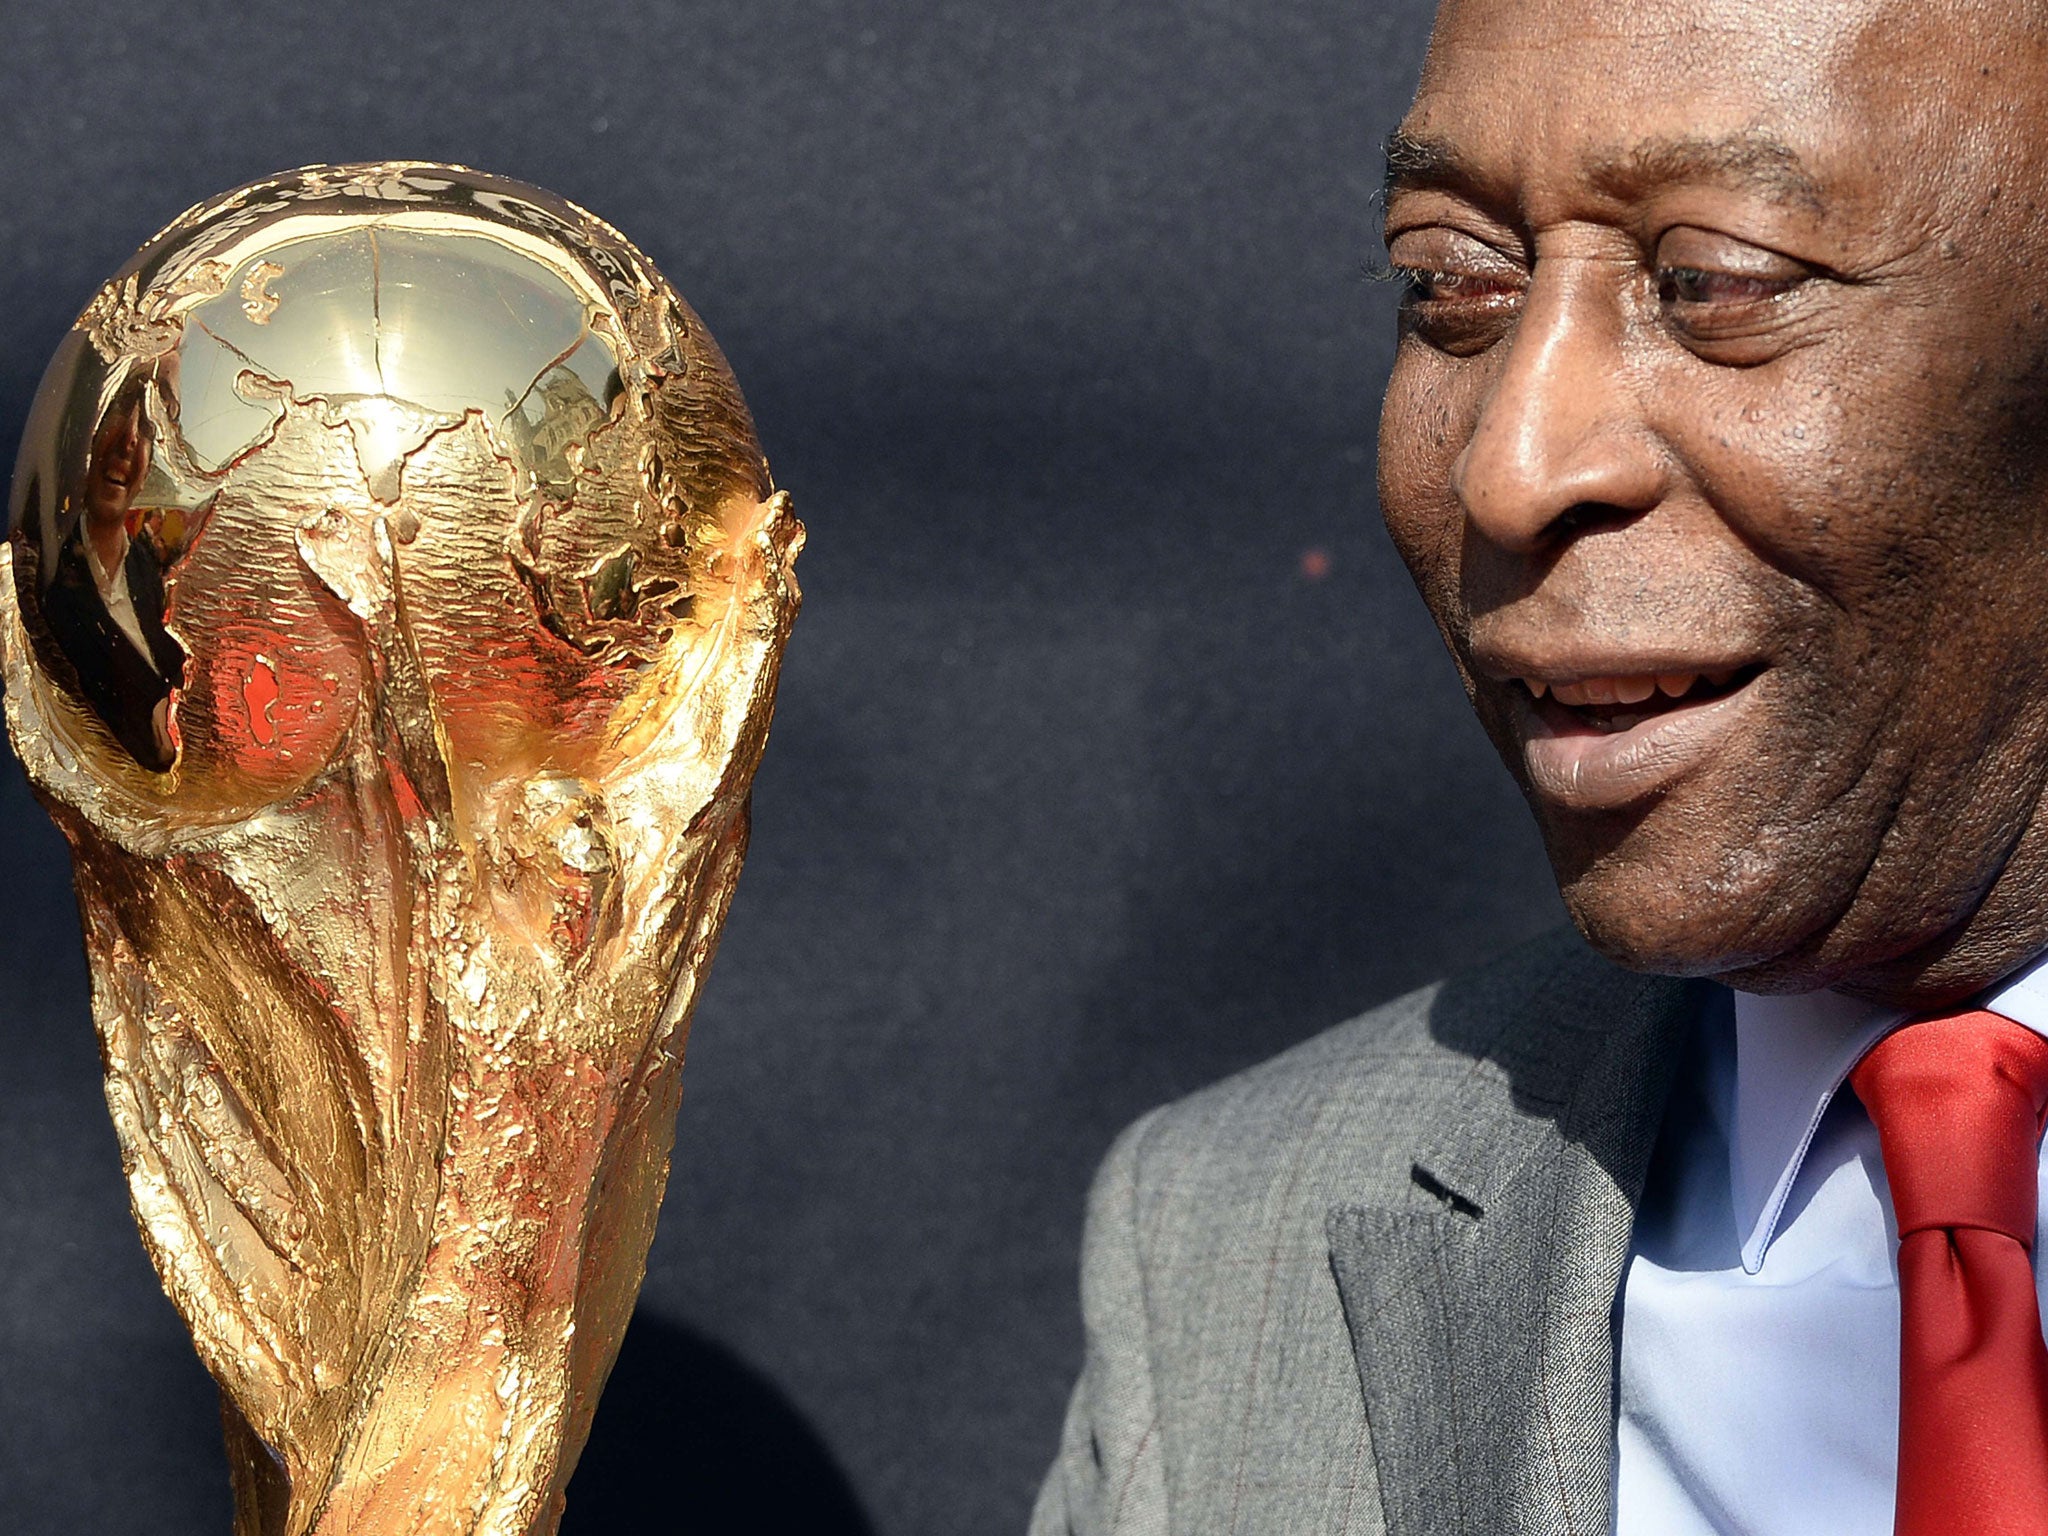 Brazilian football legend Pele looks at the FIFA World Cup trophy during a FIFA event outside the Hotel de Ville in Paris